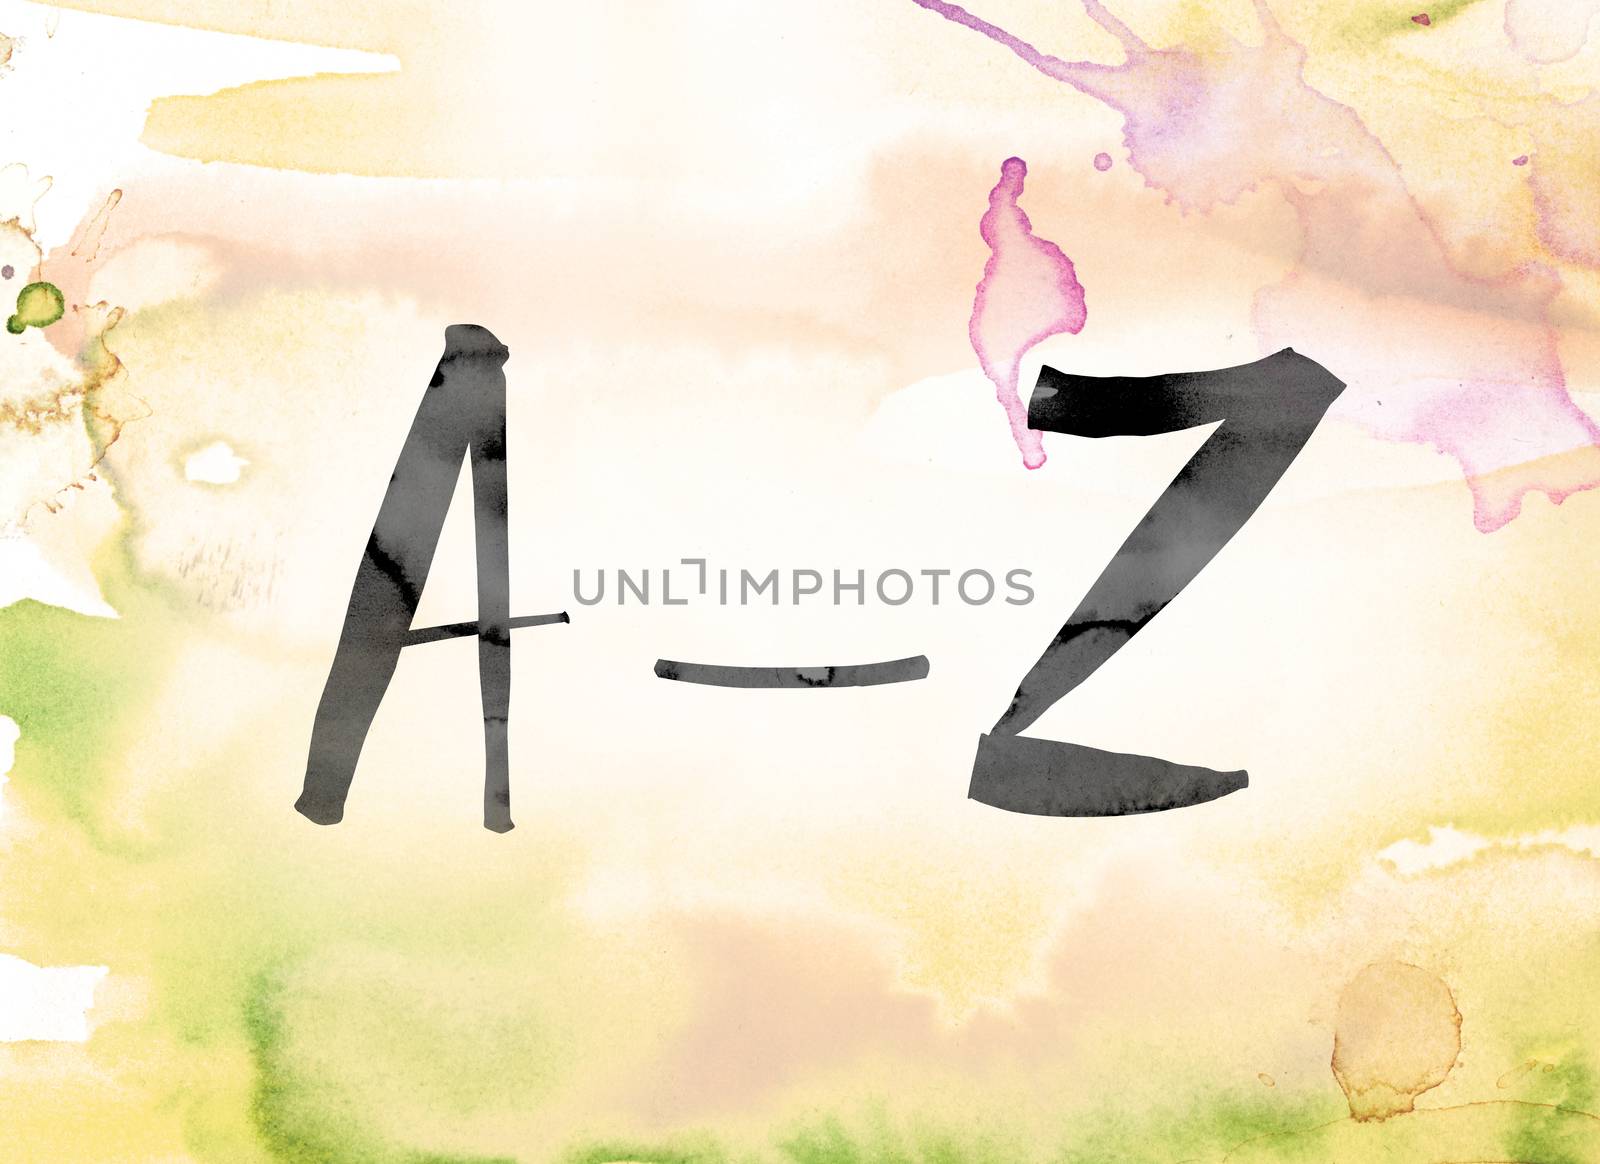 A-Z Colorful Watercolor and Ink Word Art by enterlinedesign